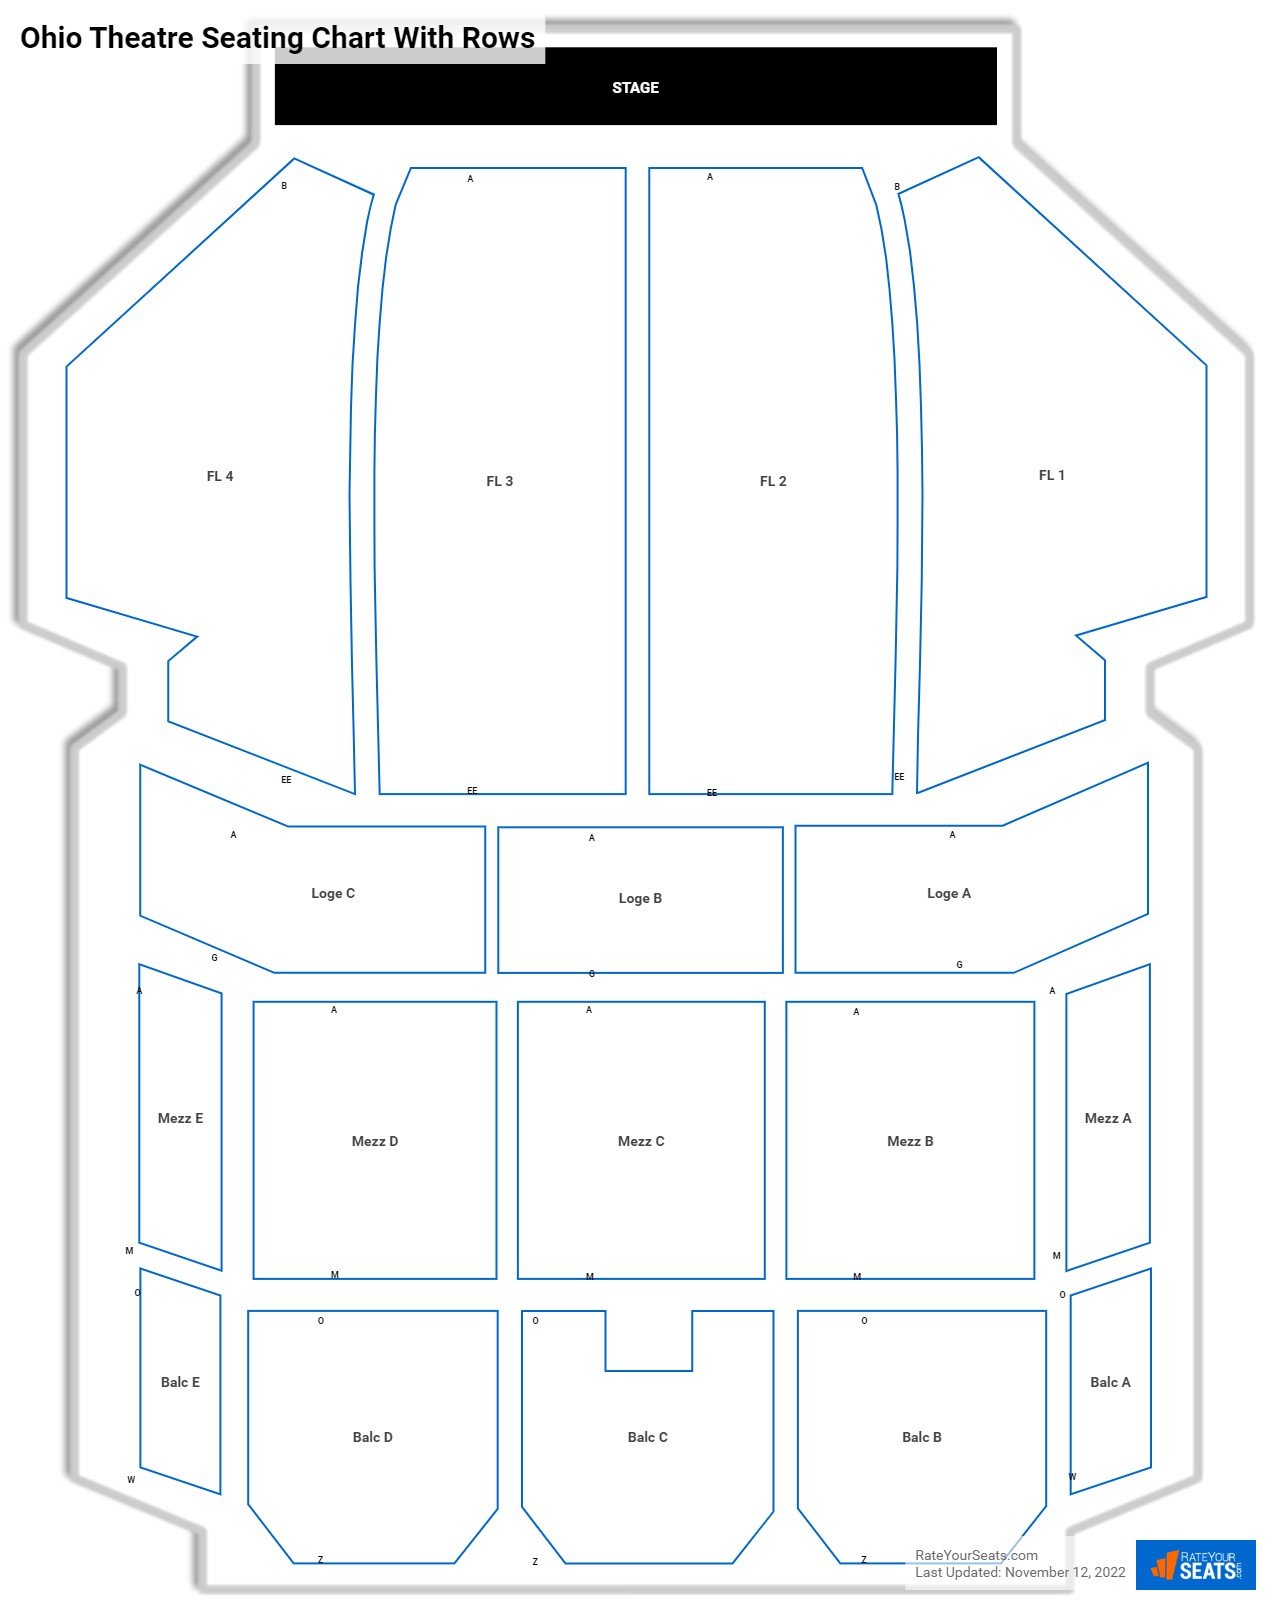 Ohio Theatre seating chart with row numbers